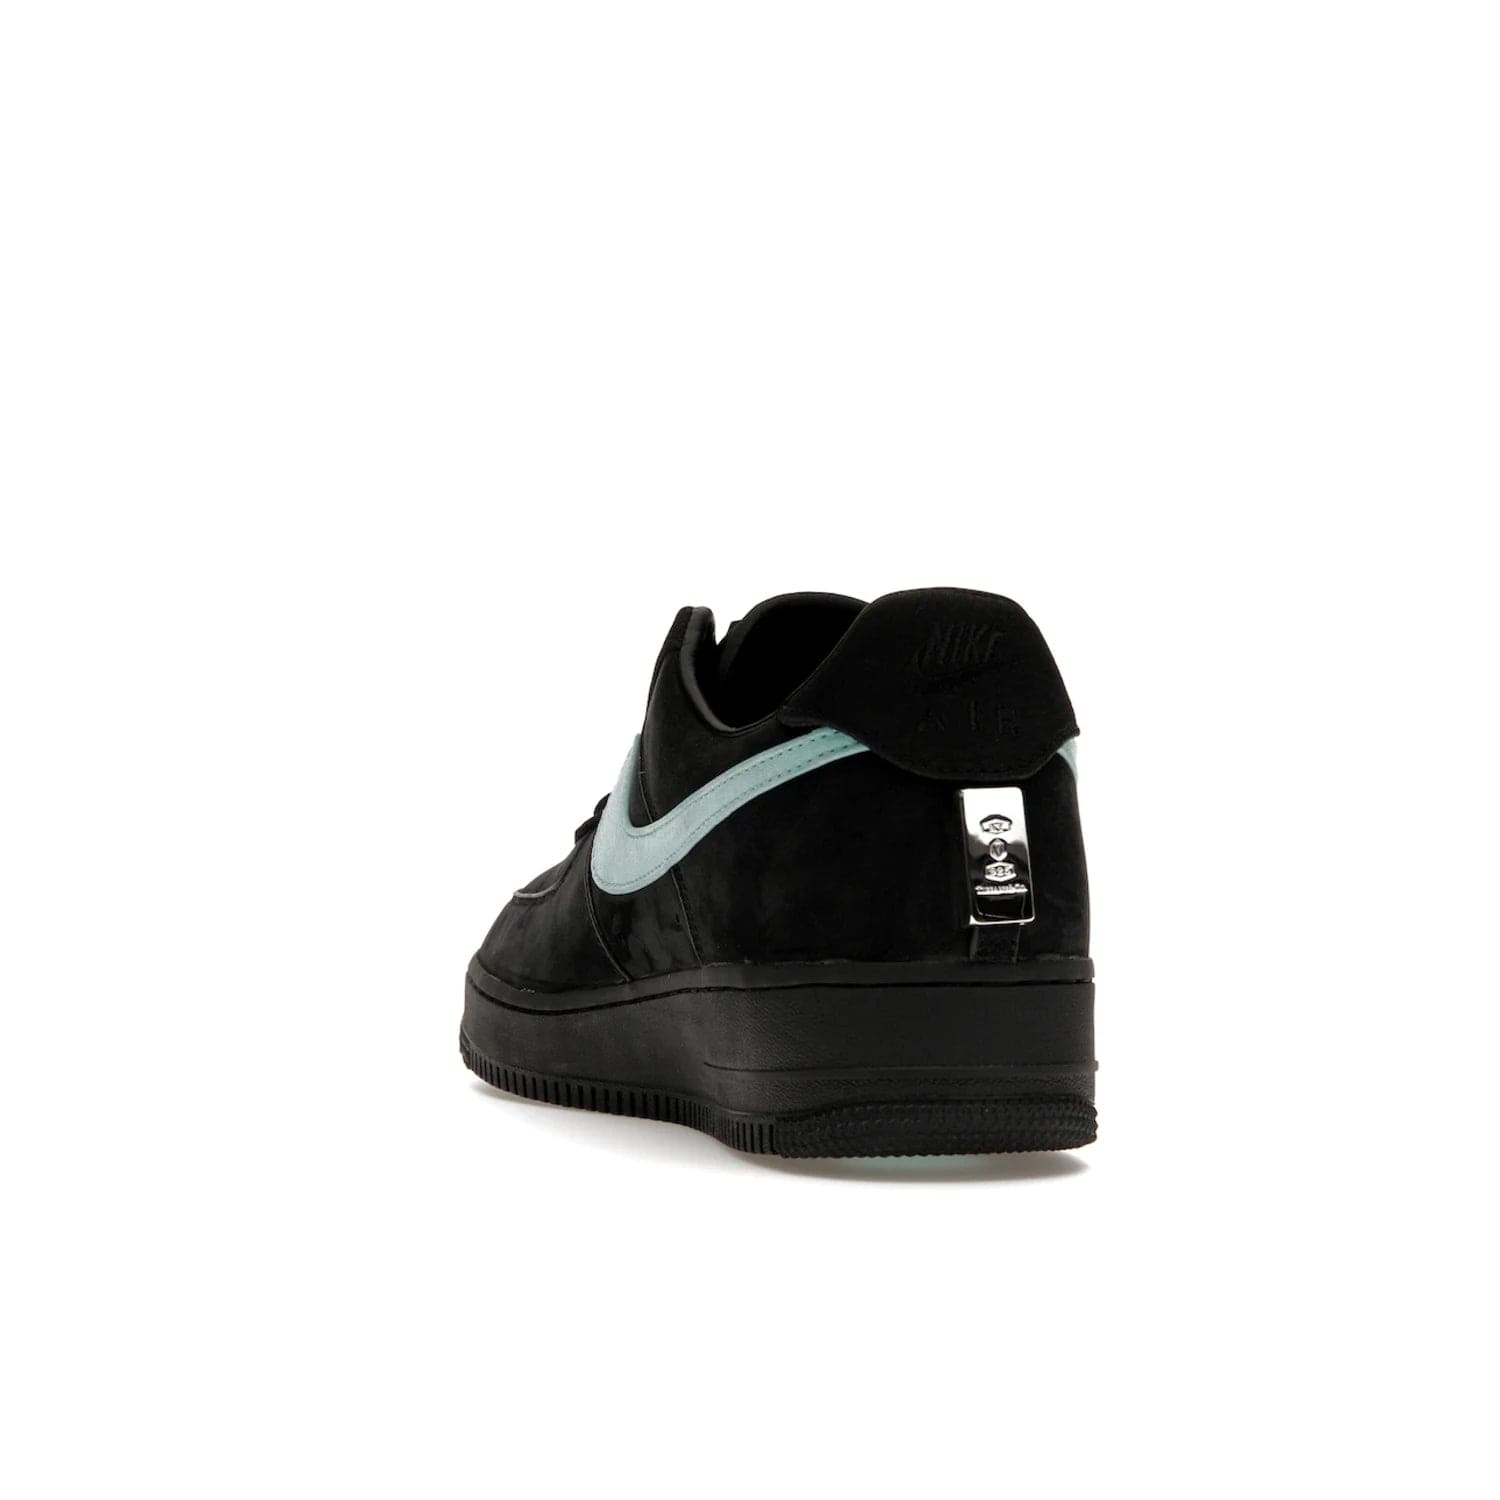 Nike Air Force 1 Low Tiffany & Co. 1837 - Image 26 - Only at www.BallersClubKickz.com - Nike & Tiffany & Co. collaborate on an exclusive sterling silver sneaker, the Air Force 1 Low Tiffany & Co. 1837. Featuring a suede uppr, Tiffany Blue Swoosh and "Tiffany" cursive branding, this pair of AF1s offers an opulent fusion of athleisure and luxury fashion. Release date March 2023.